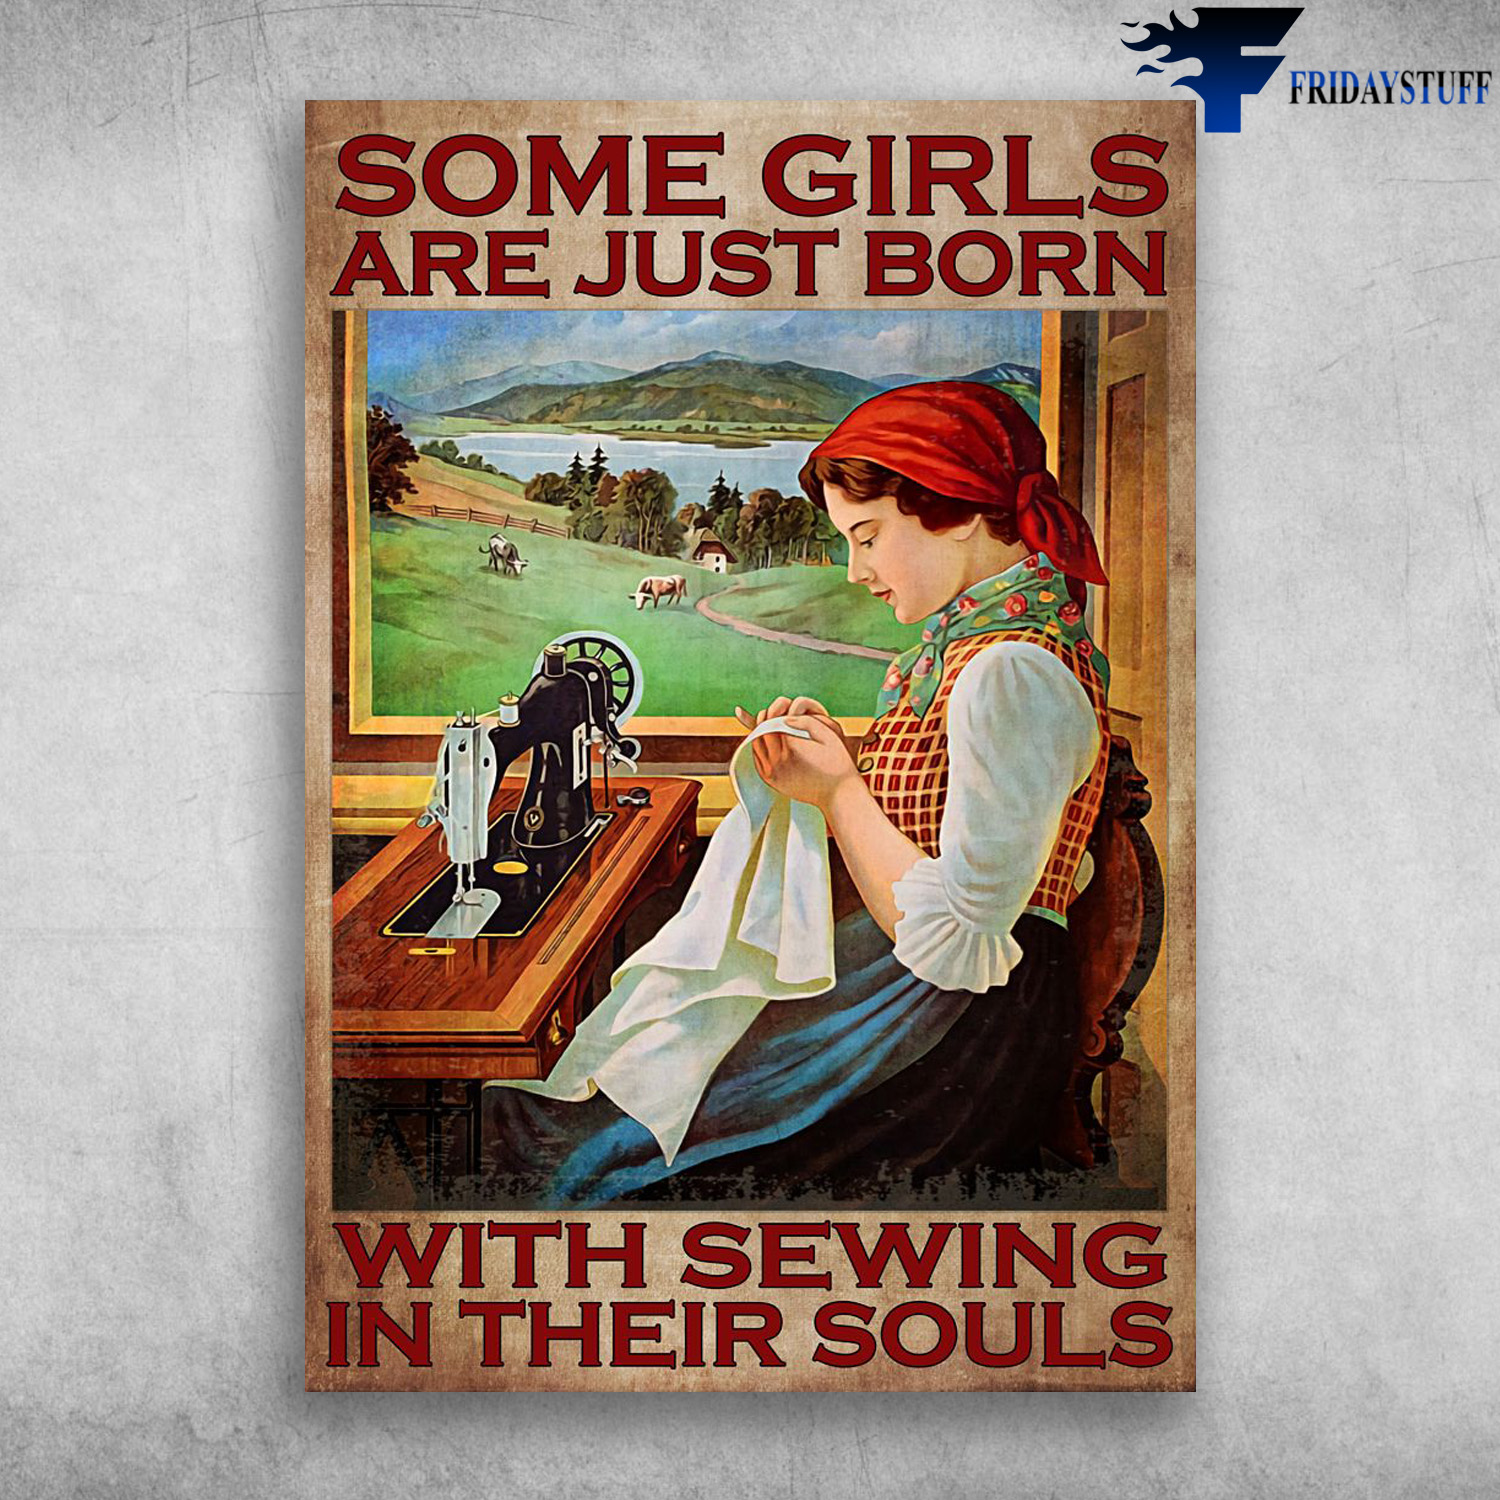 Girl Sewing In A Farmhouse - Some Girls Are Just Born, With Sewing In Their Souls